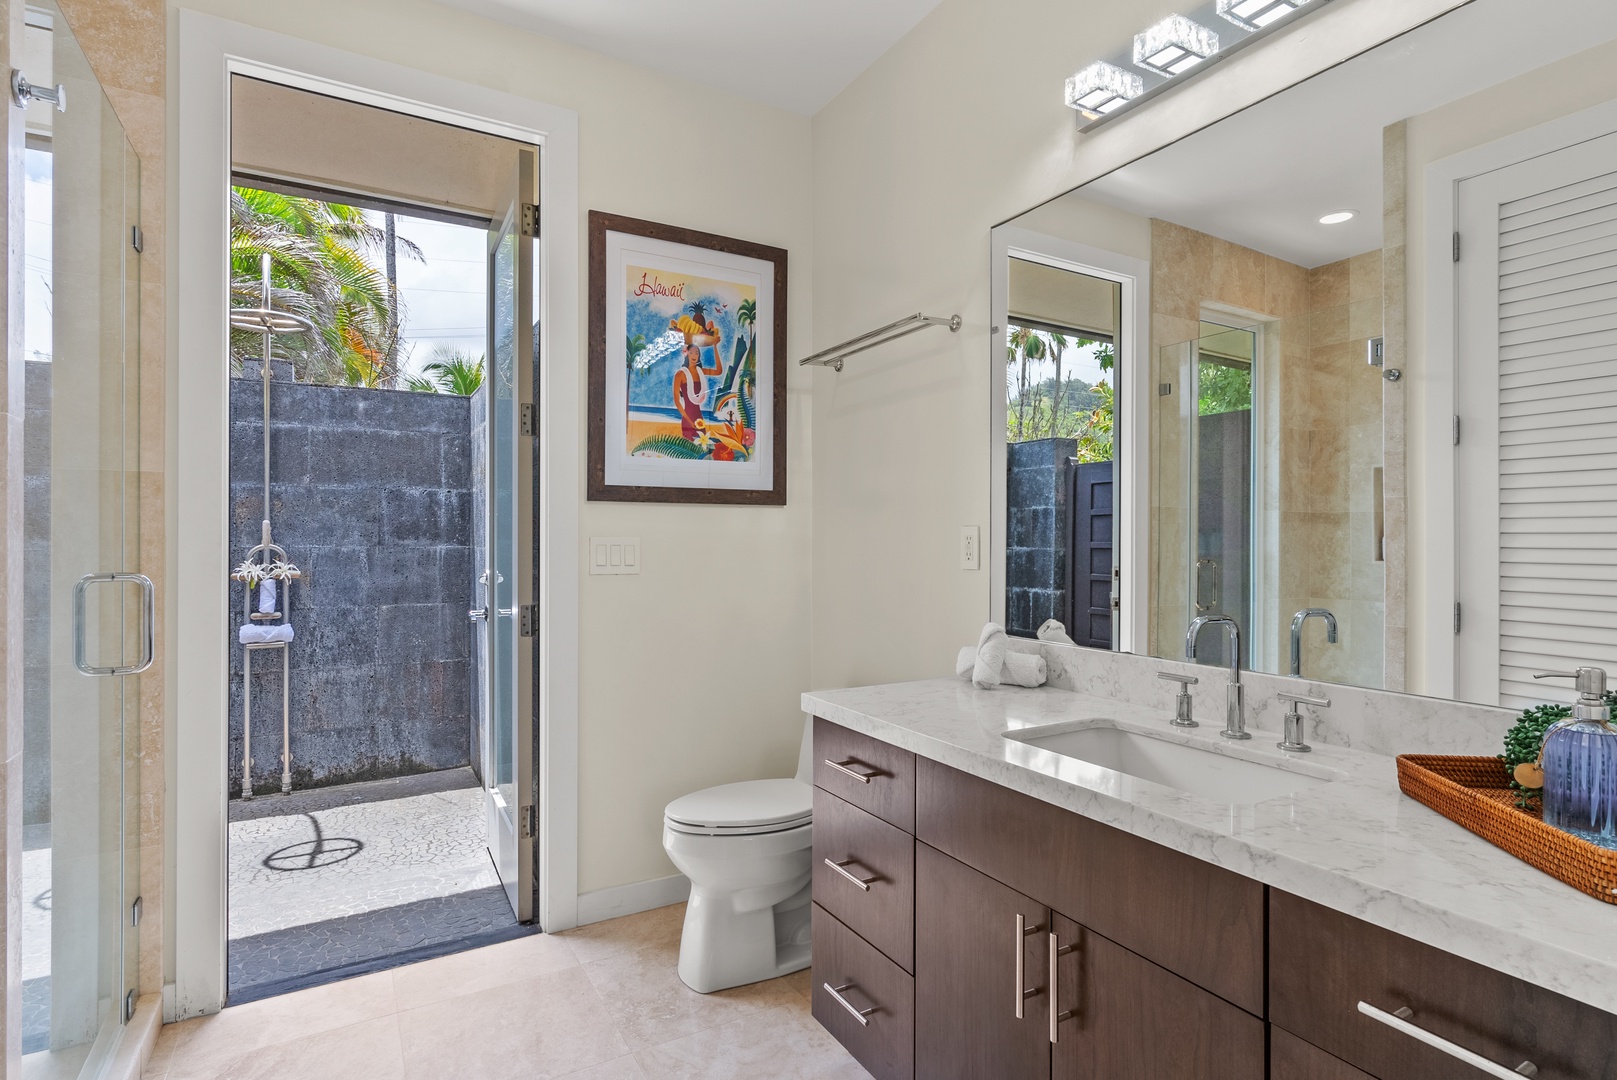 Laie Vacation Rentals, Laie Beachfront Estate - The ensuite bathroom has ample vanity space and an outdoor shower.